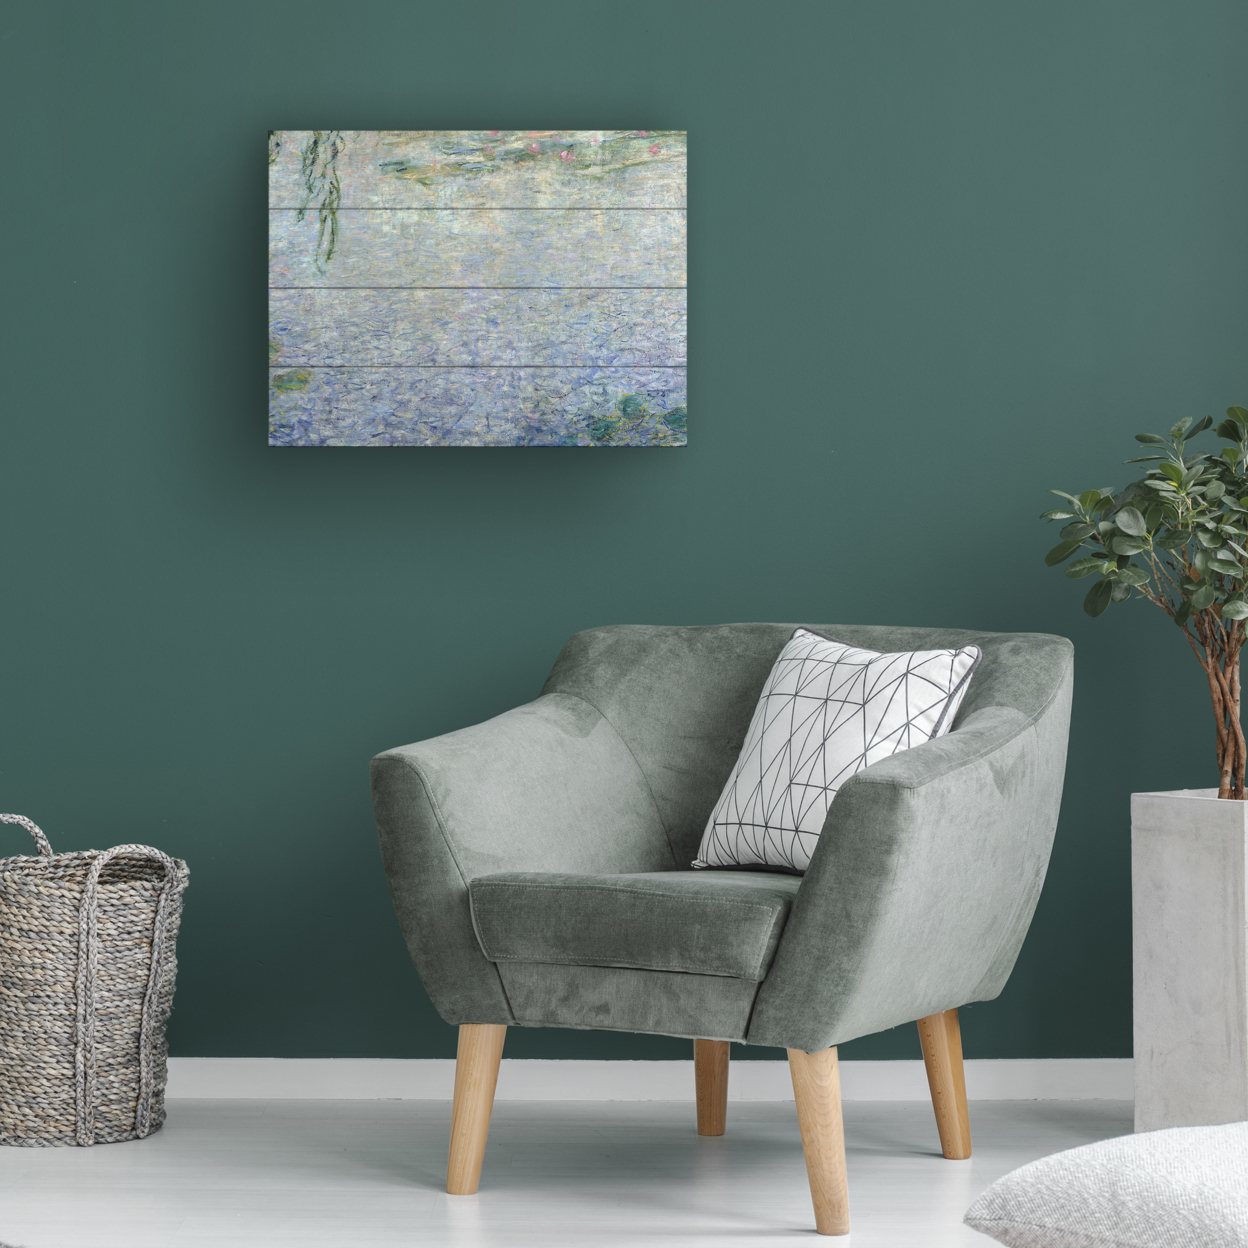 Wall Art 12 X 16 Inches Titled Waterlillies Morning II Ready To Hang Printed On Wooden Planks